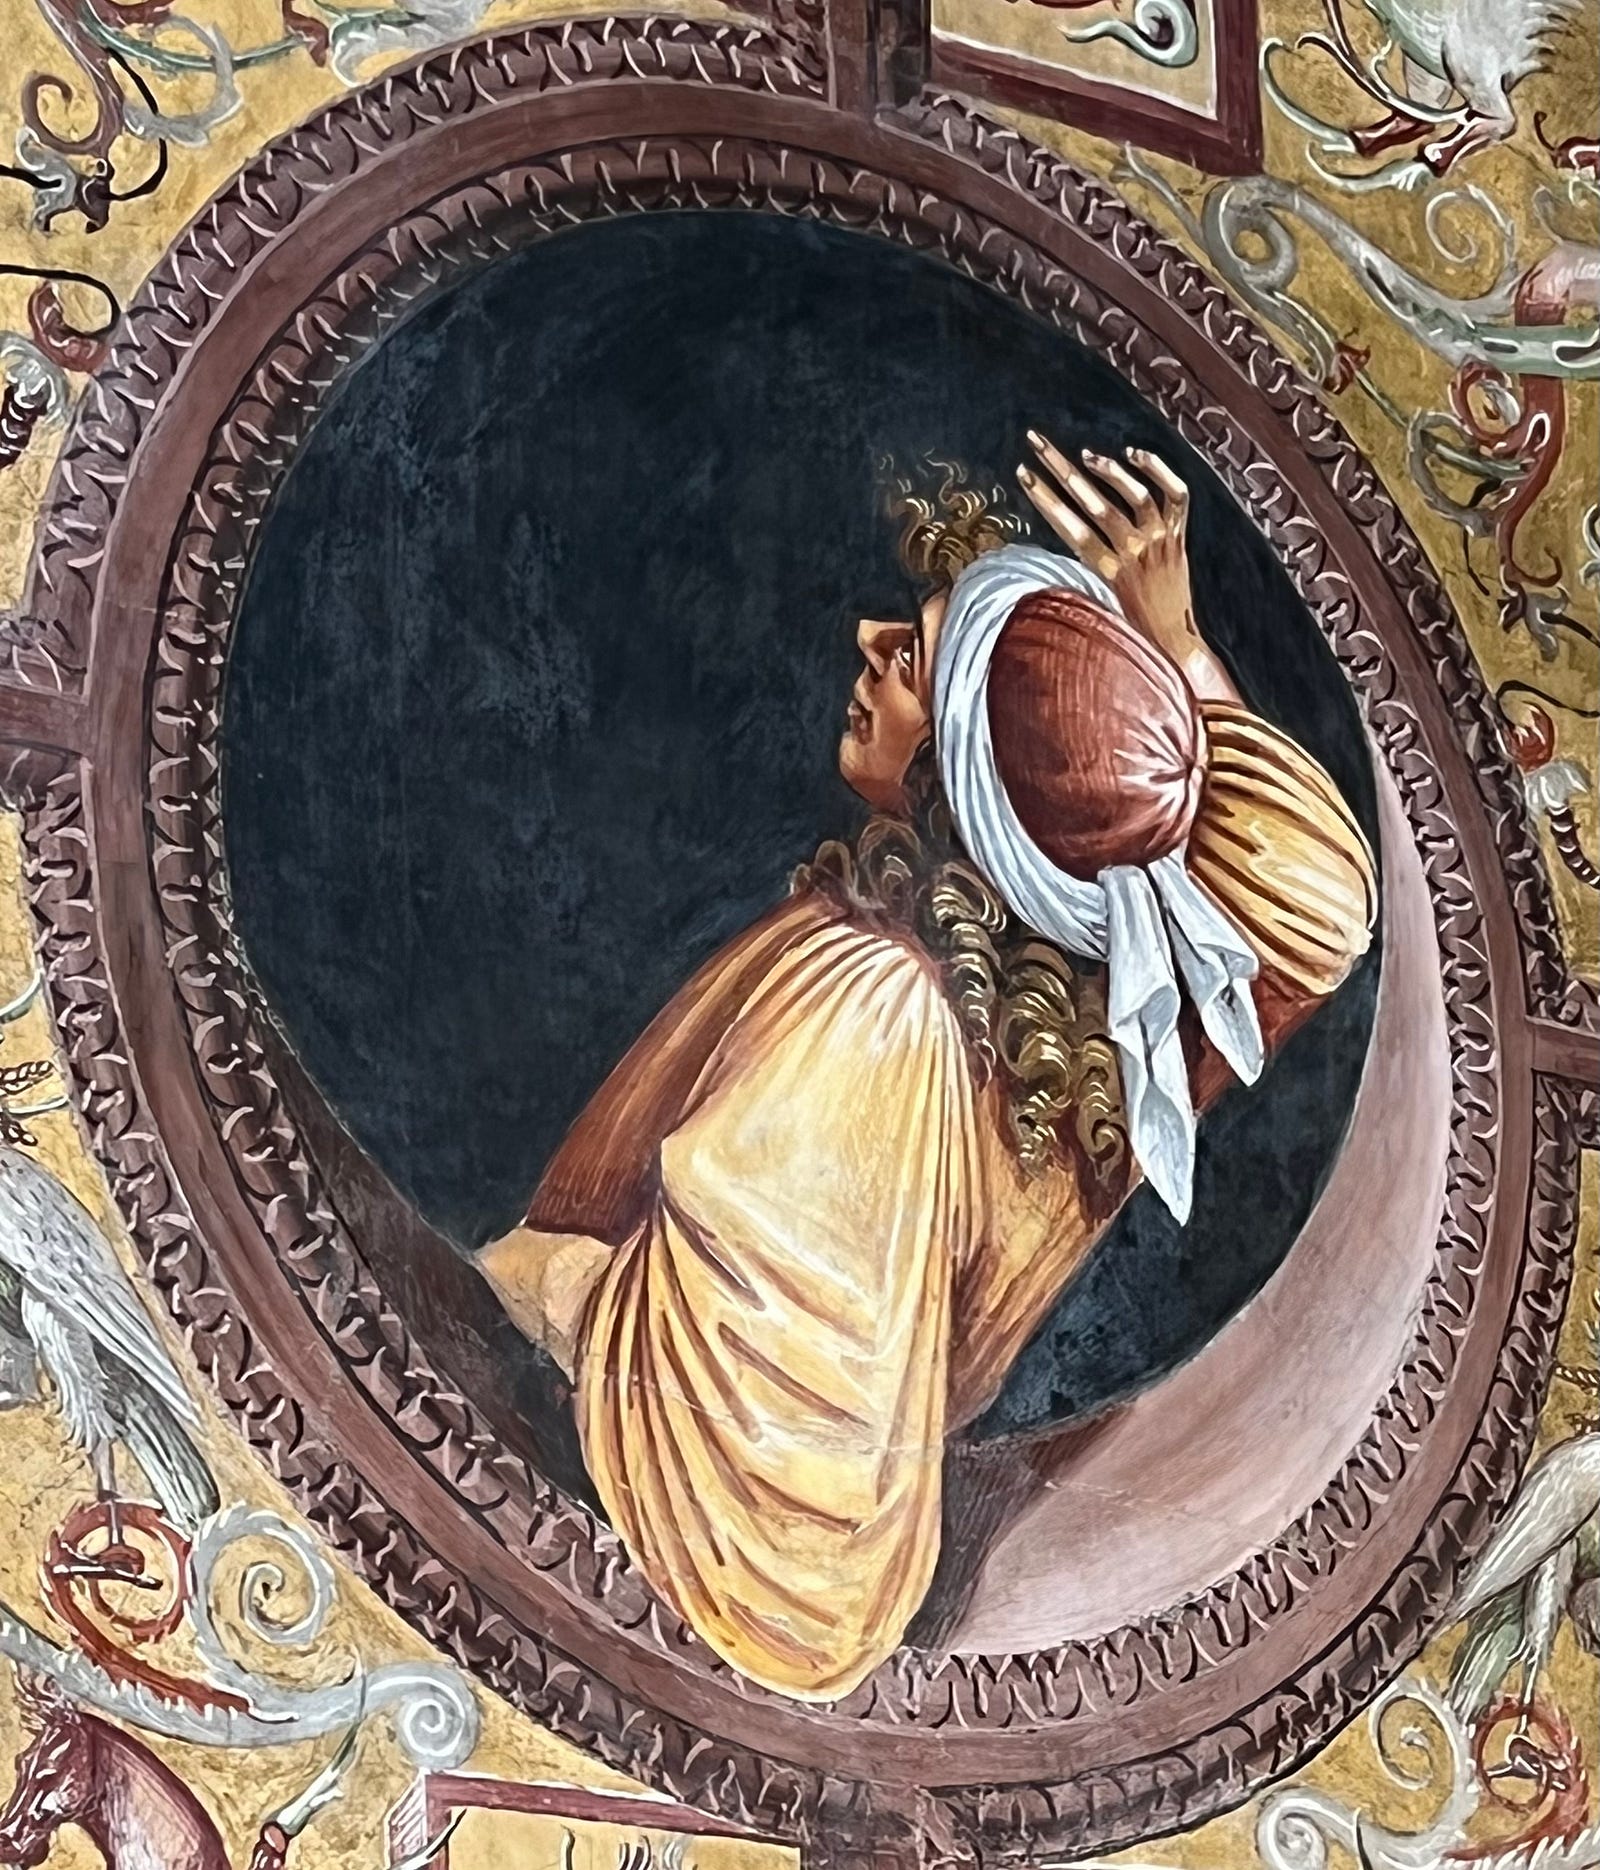 Photo of a painting in the Duomo di Orvieto of a mediaeval man looking out an open lunette at the scene above him.